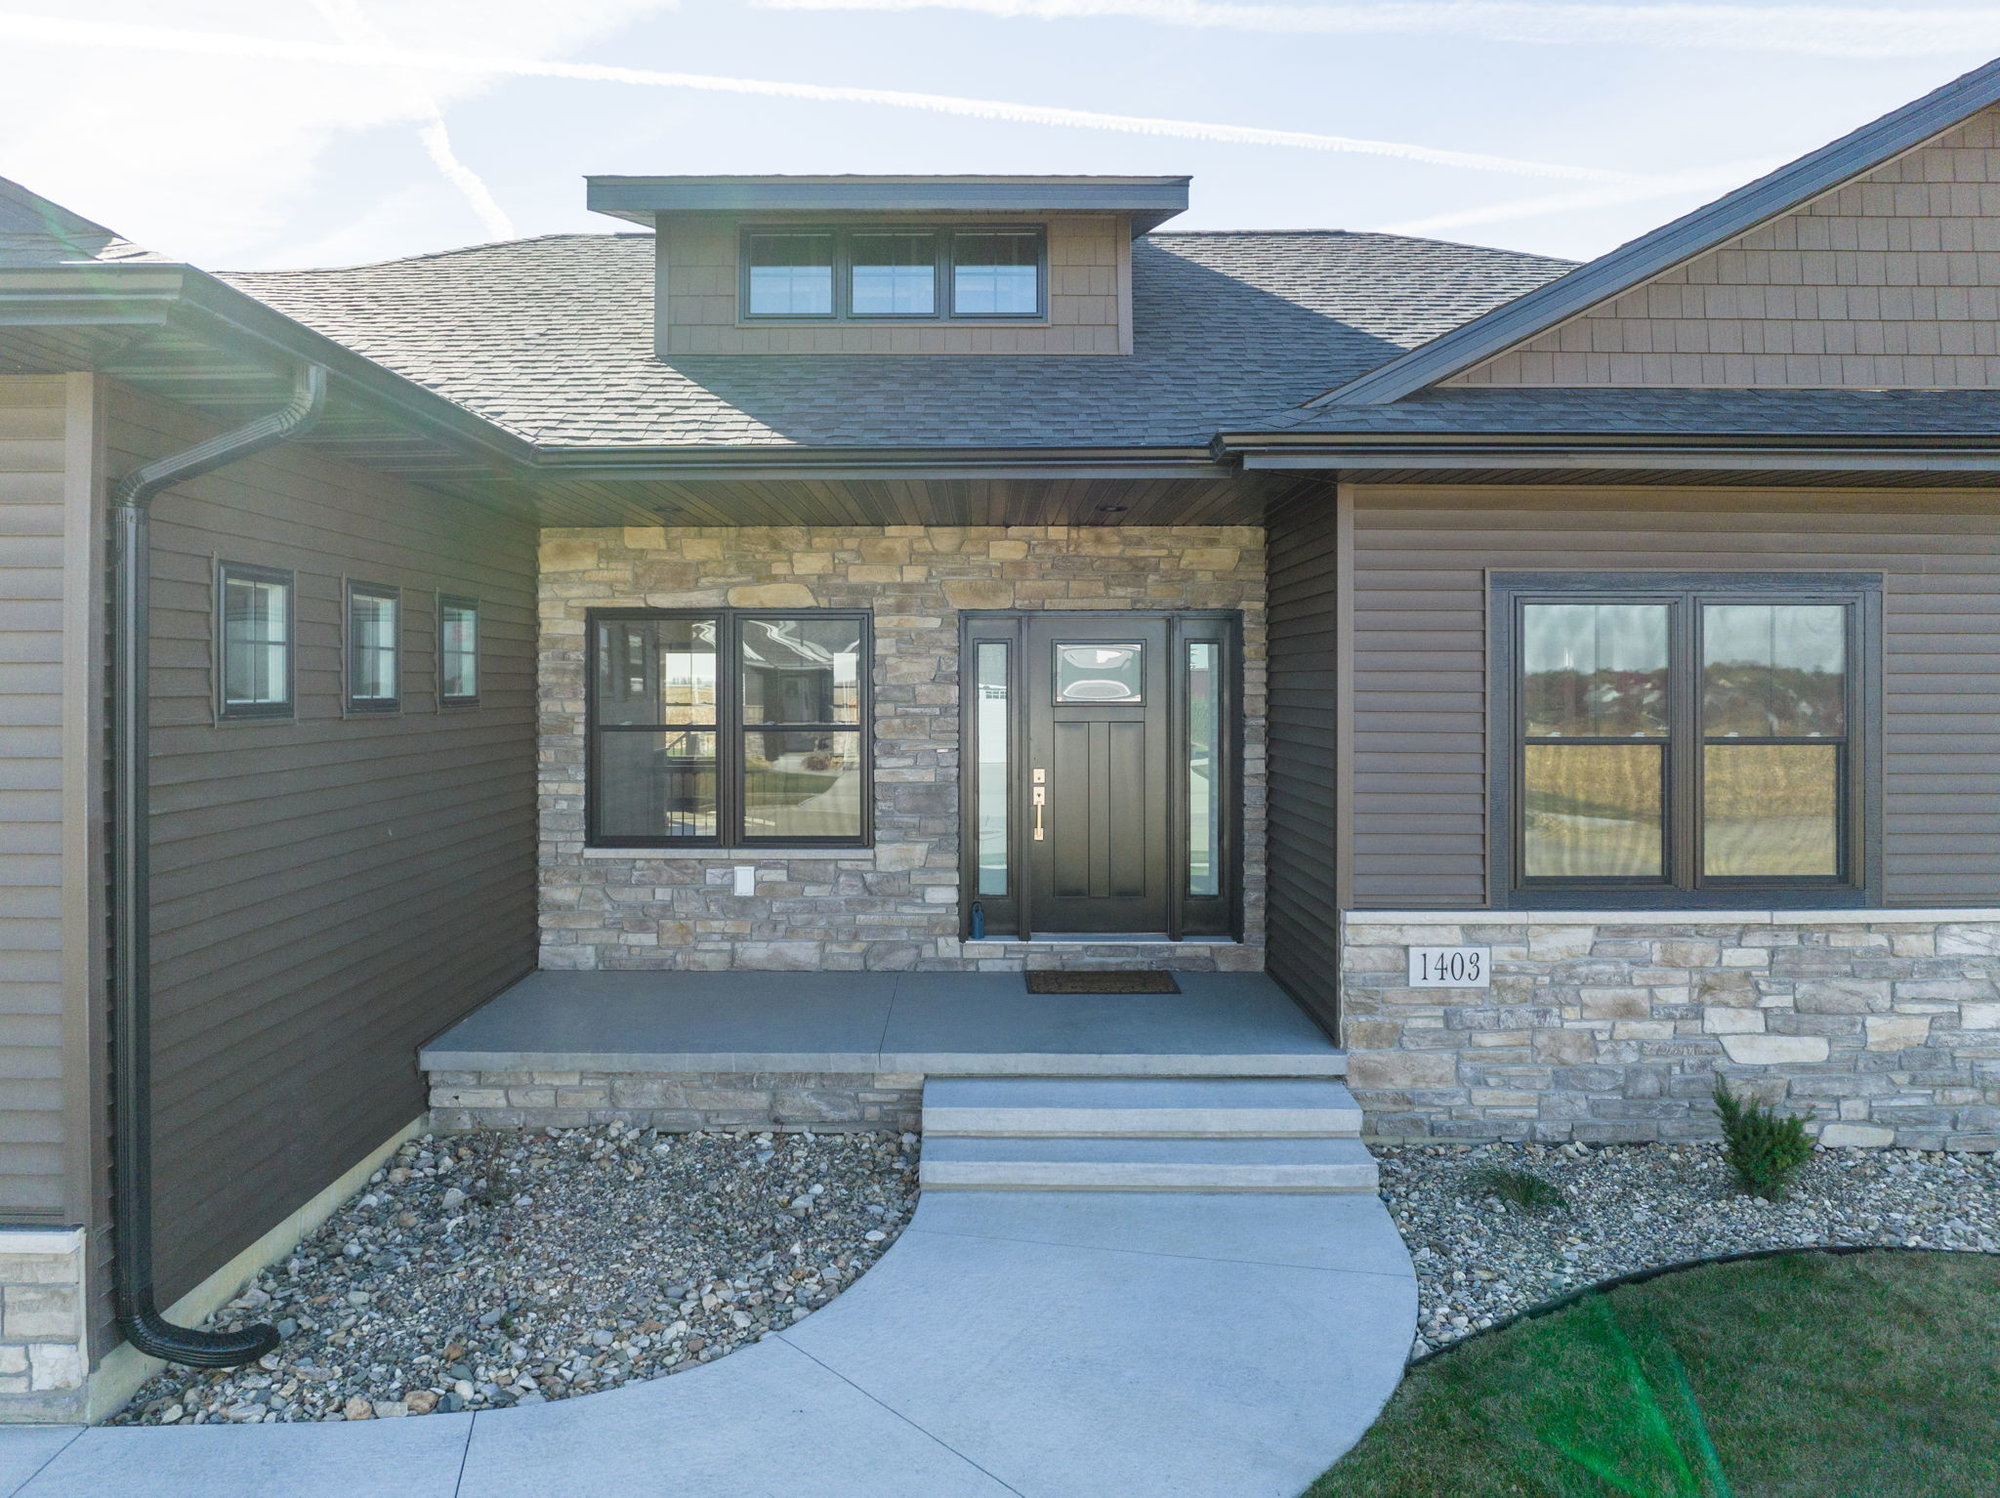 Stunning New Construction Ranch Home with amenities and quality finishes throughout